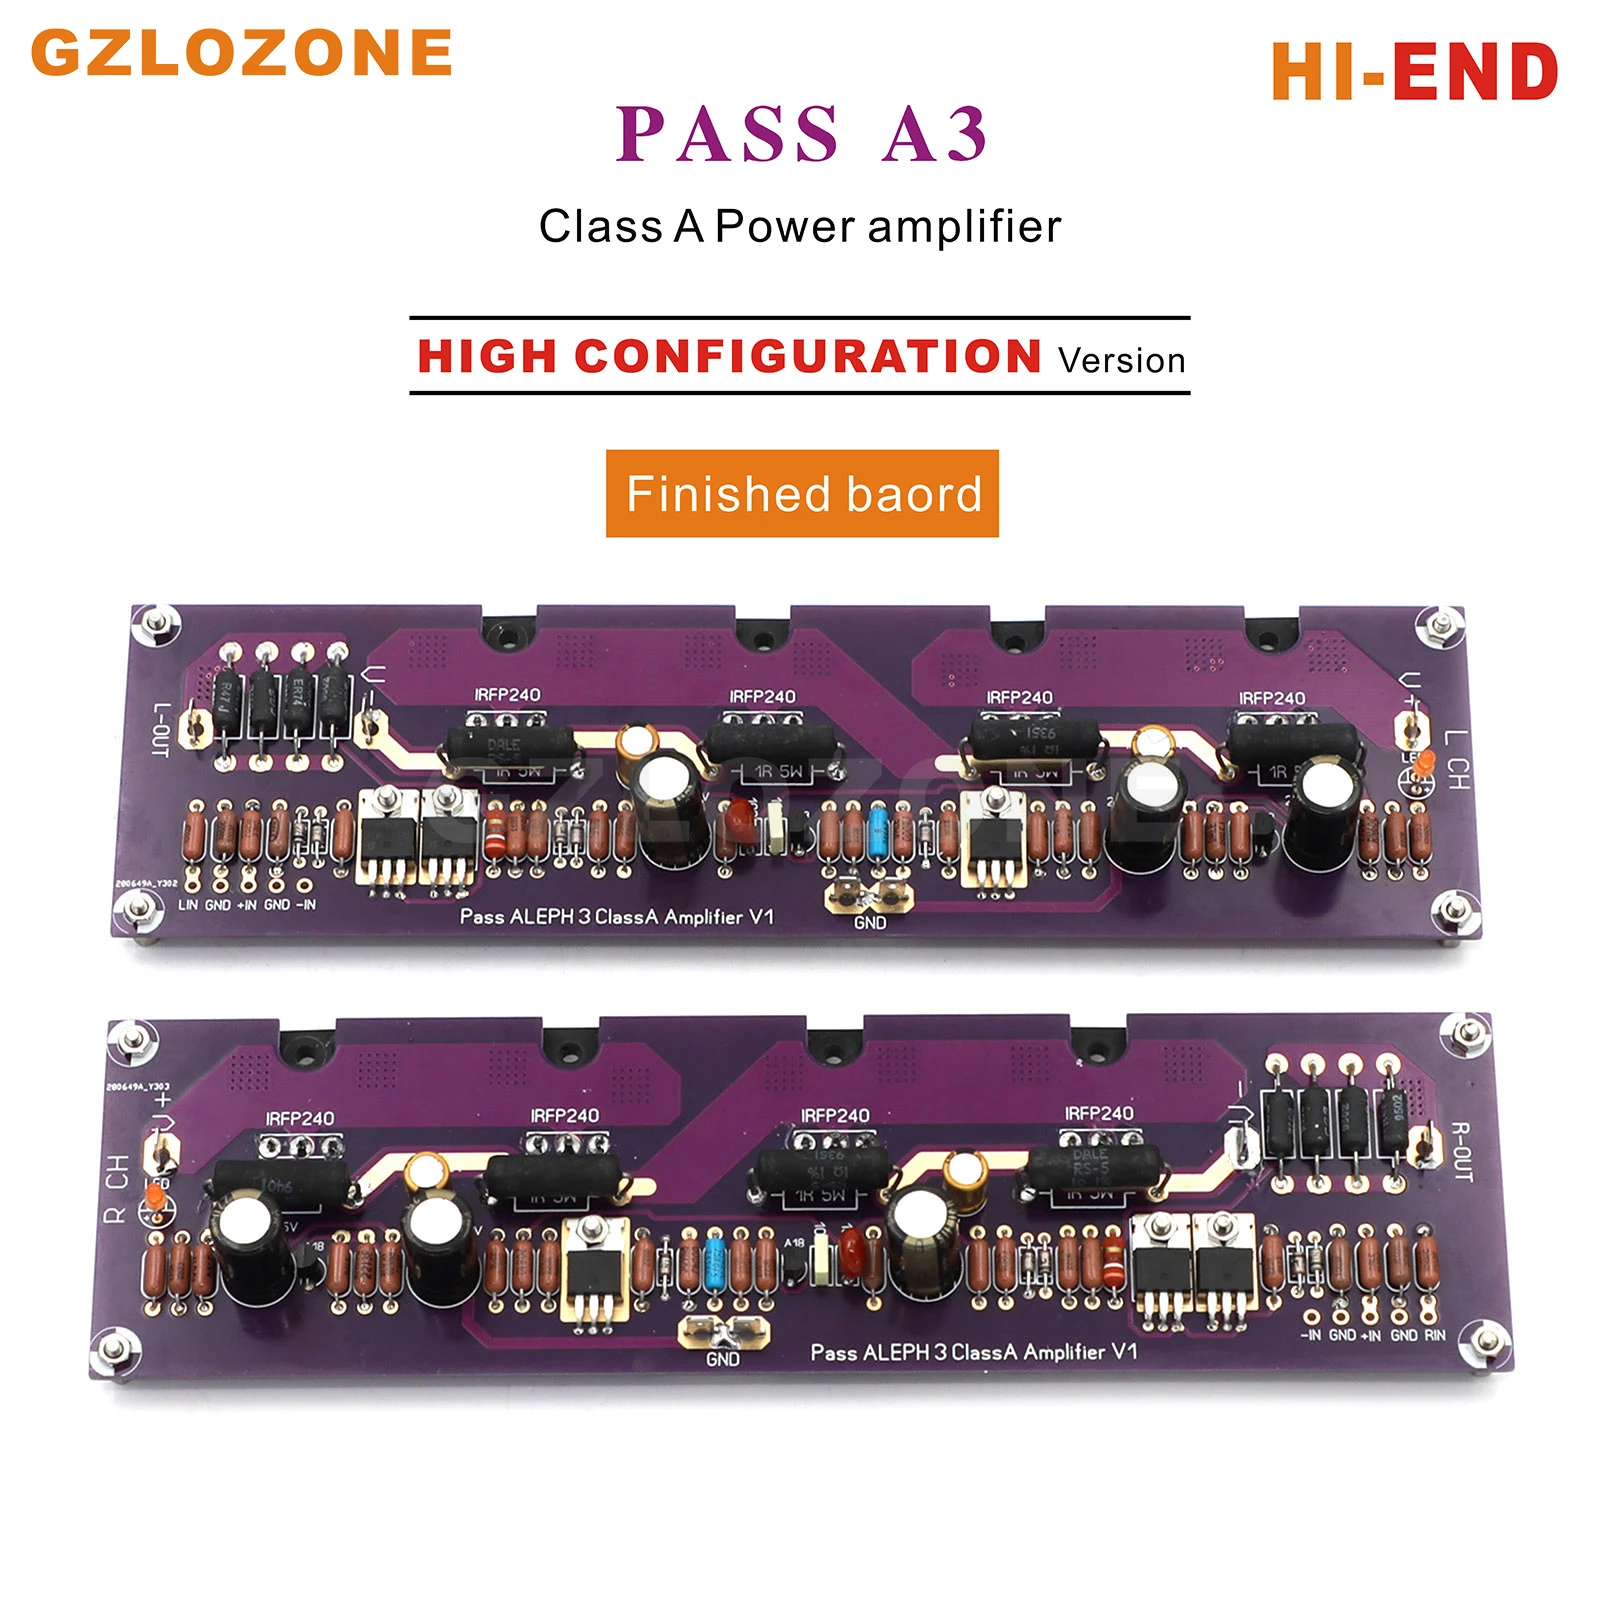 

HI-END High configuration ver PASS A3 Pure Class A Power amplifier Base on PASS Labs aleph 3 DIY Kit/Finished board 30W+30W